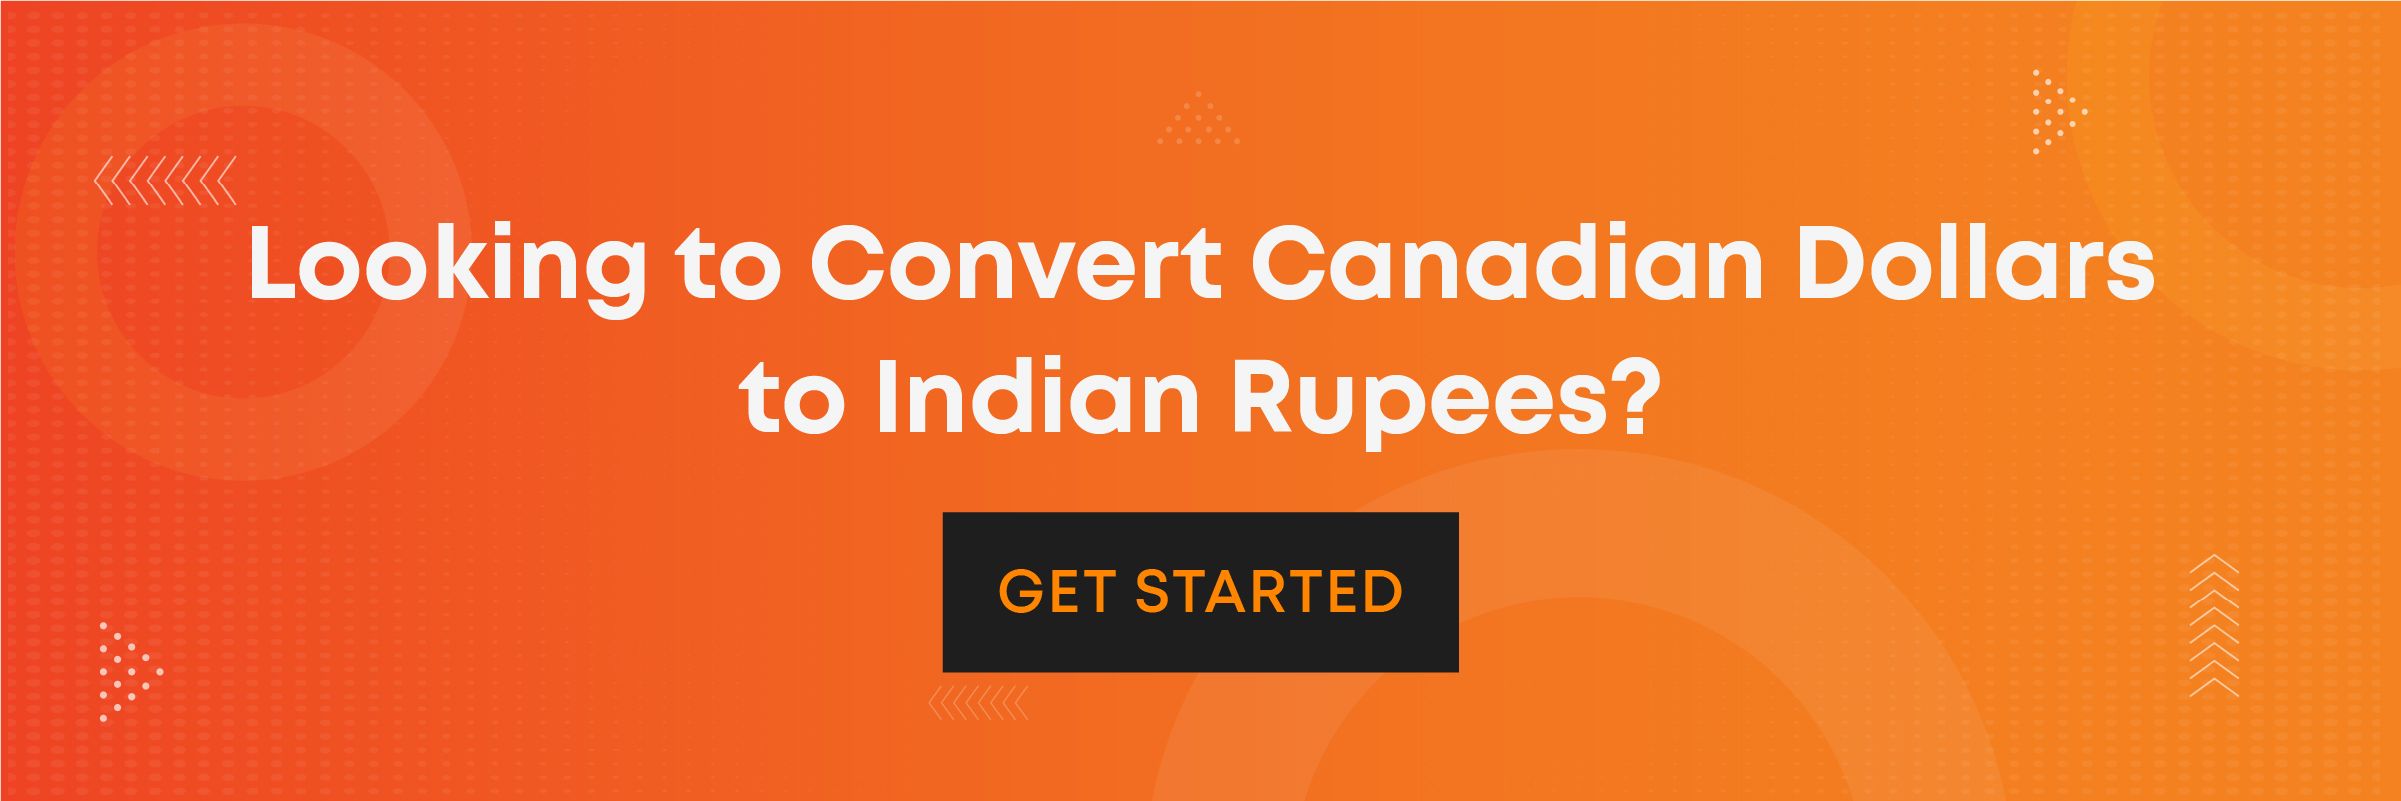 Looking to Convert Canadian Dollars to Indian Rupees